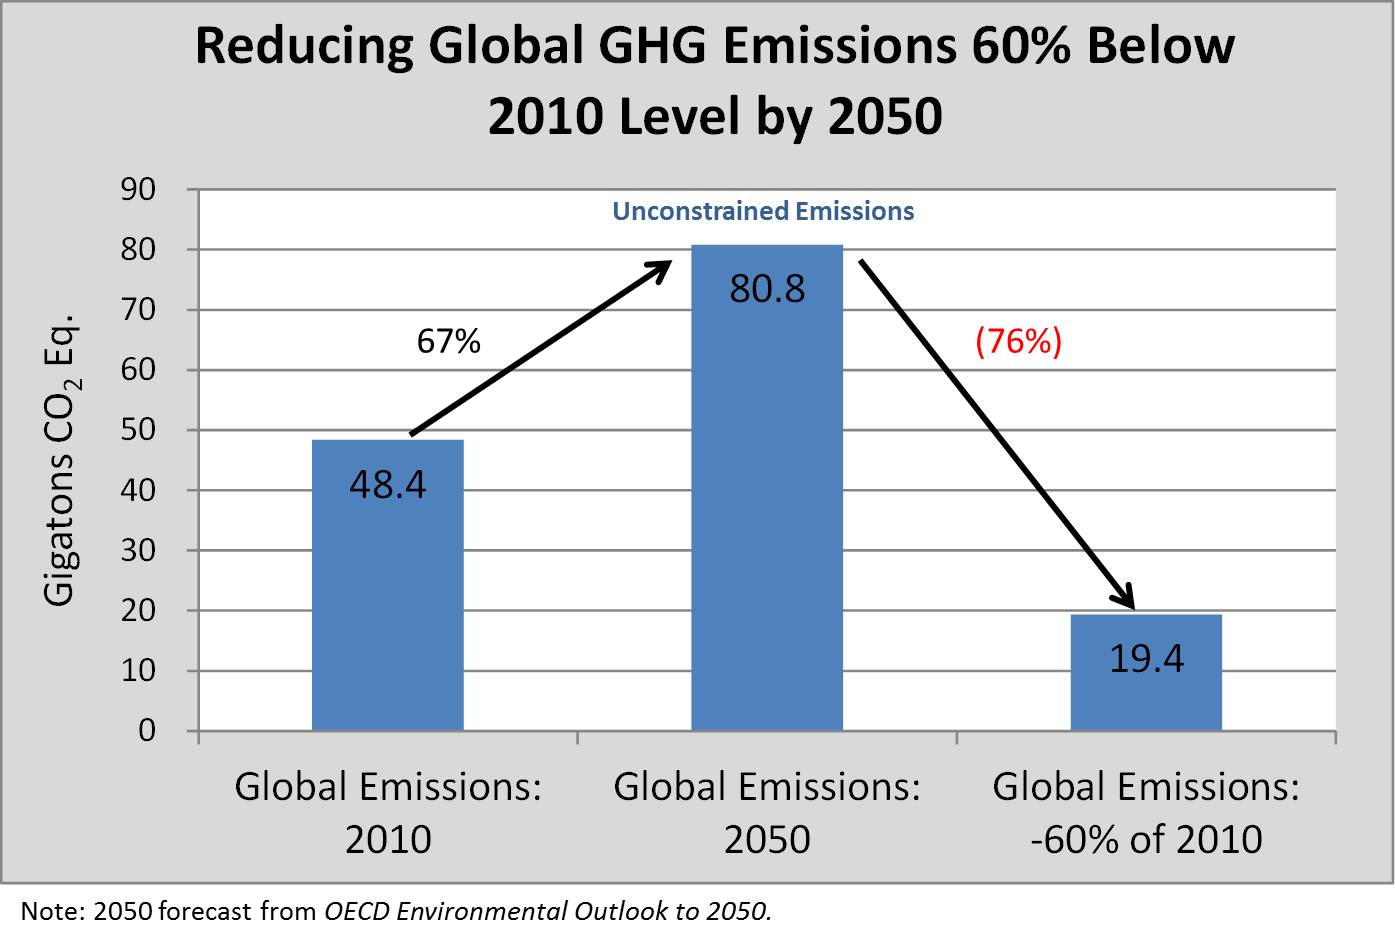 The European Union S 50 Global Greenhouse Gas Emissions Goal Is Unrealistic Global Energy Institute